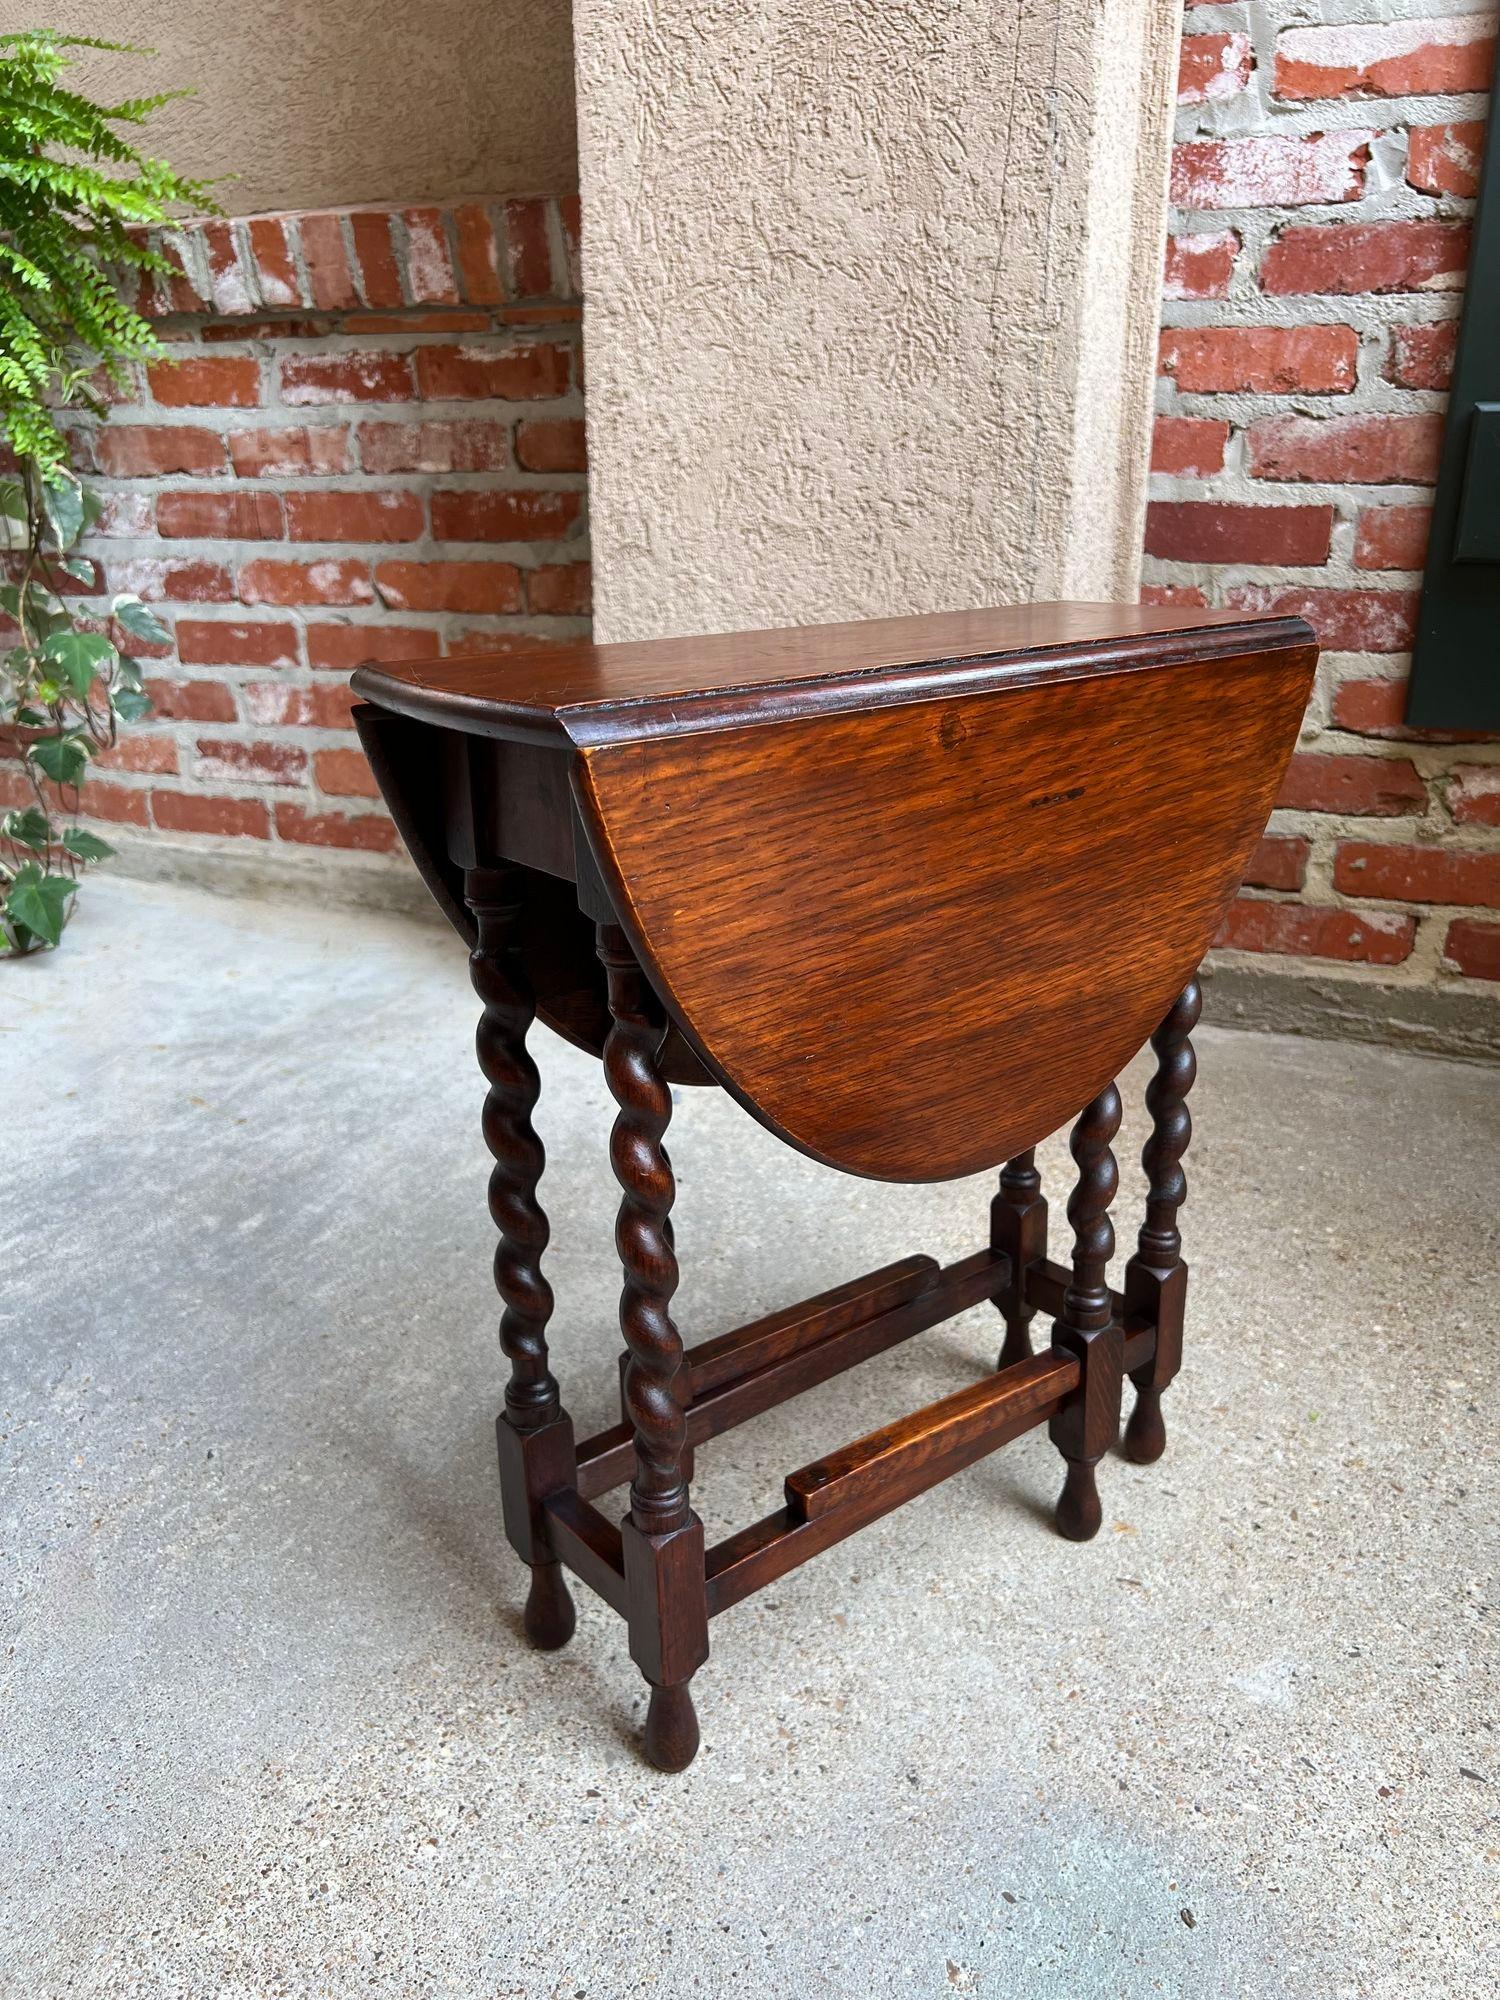 Antique English Drop Leaf Tea Table Barley Twist SUPER PETITE Dark Oak Gate Leg.

Direct from England, (YES, our English container finally arrived, and we have some amazing English antiques, and of course, lots of barley twist)!
This is a